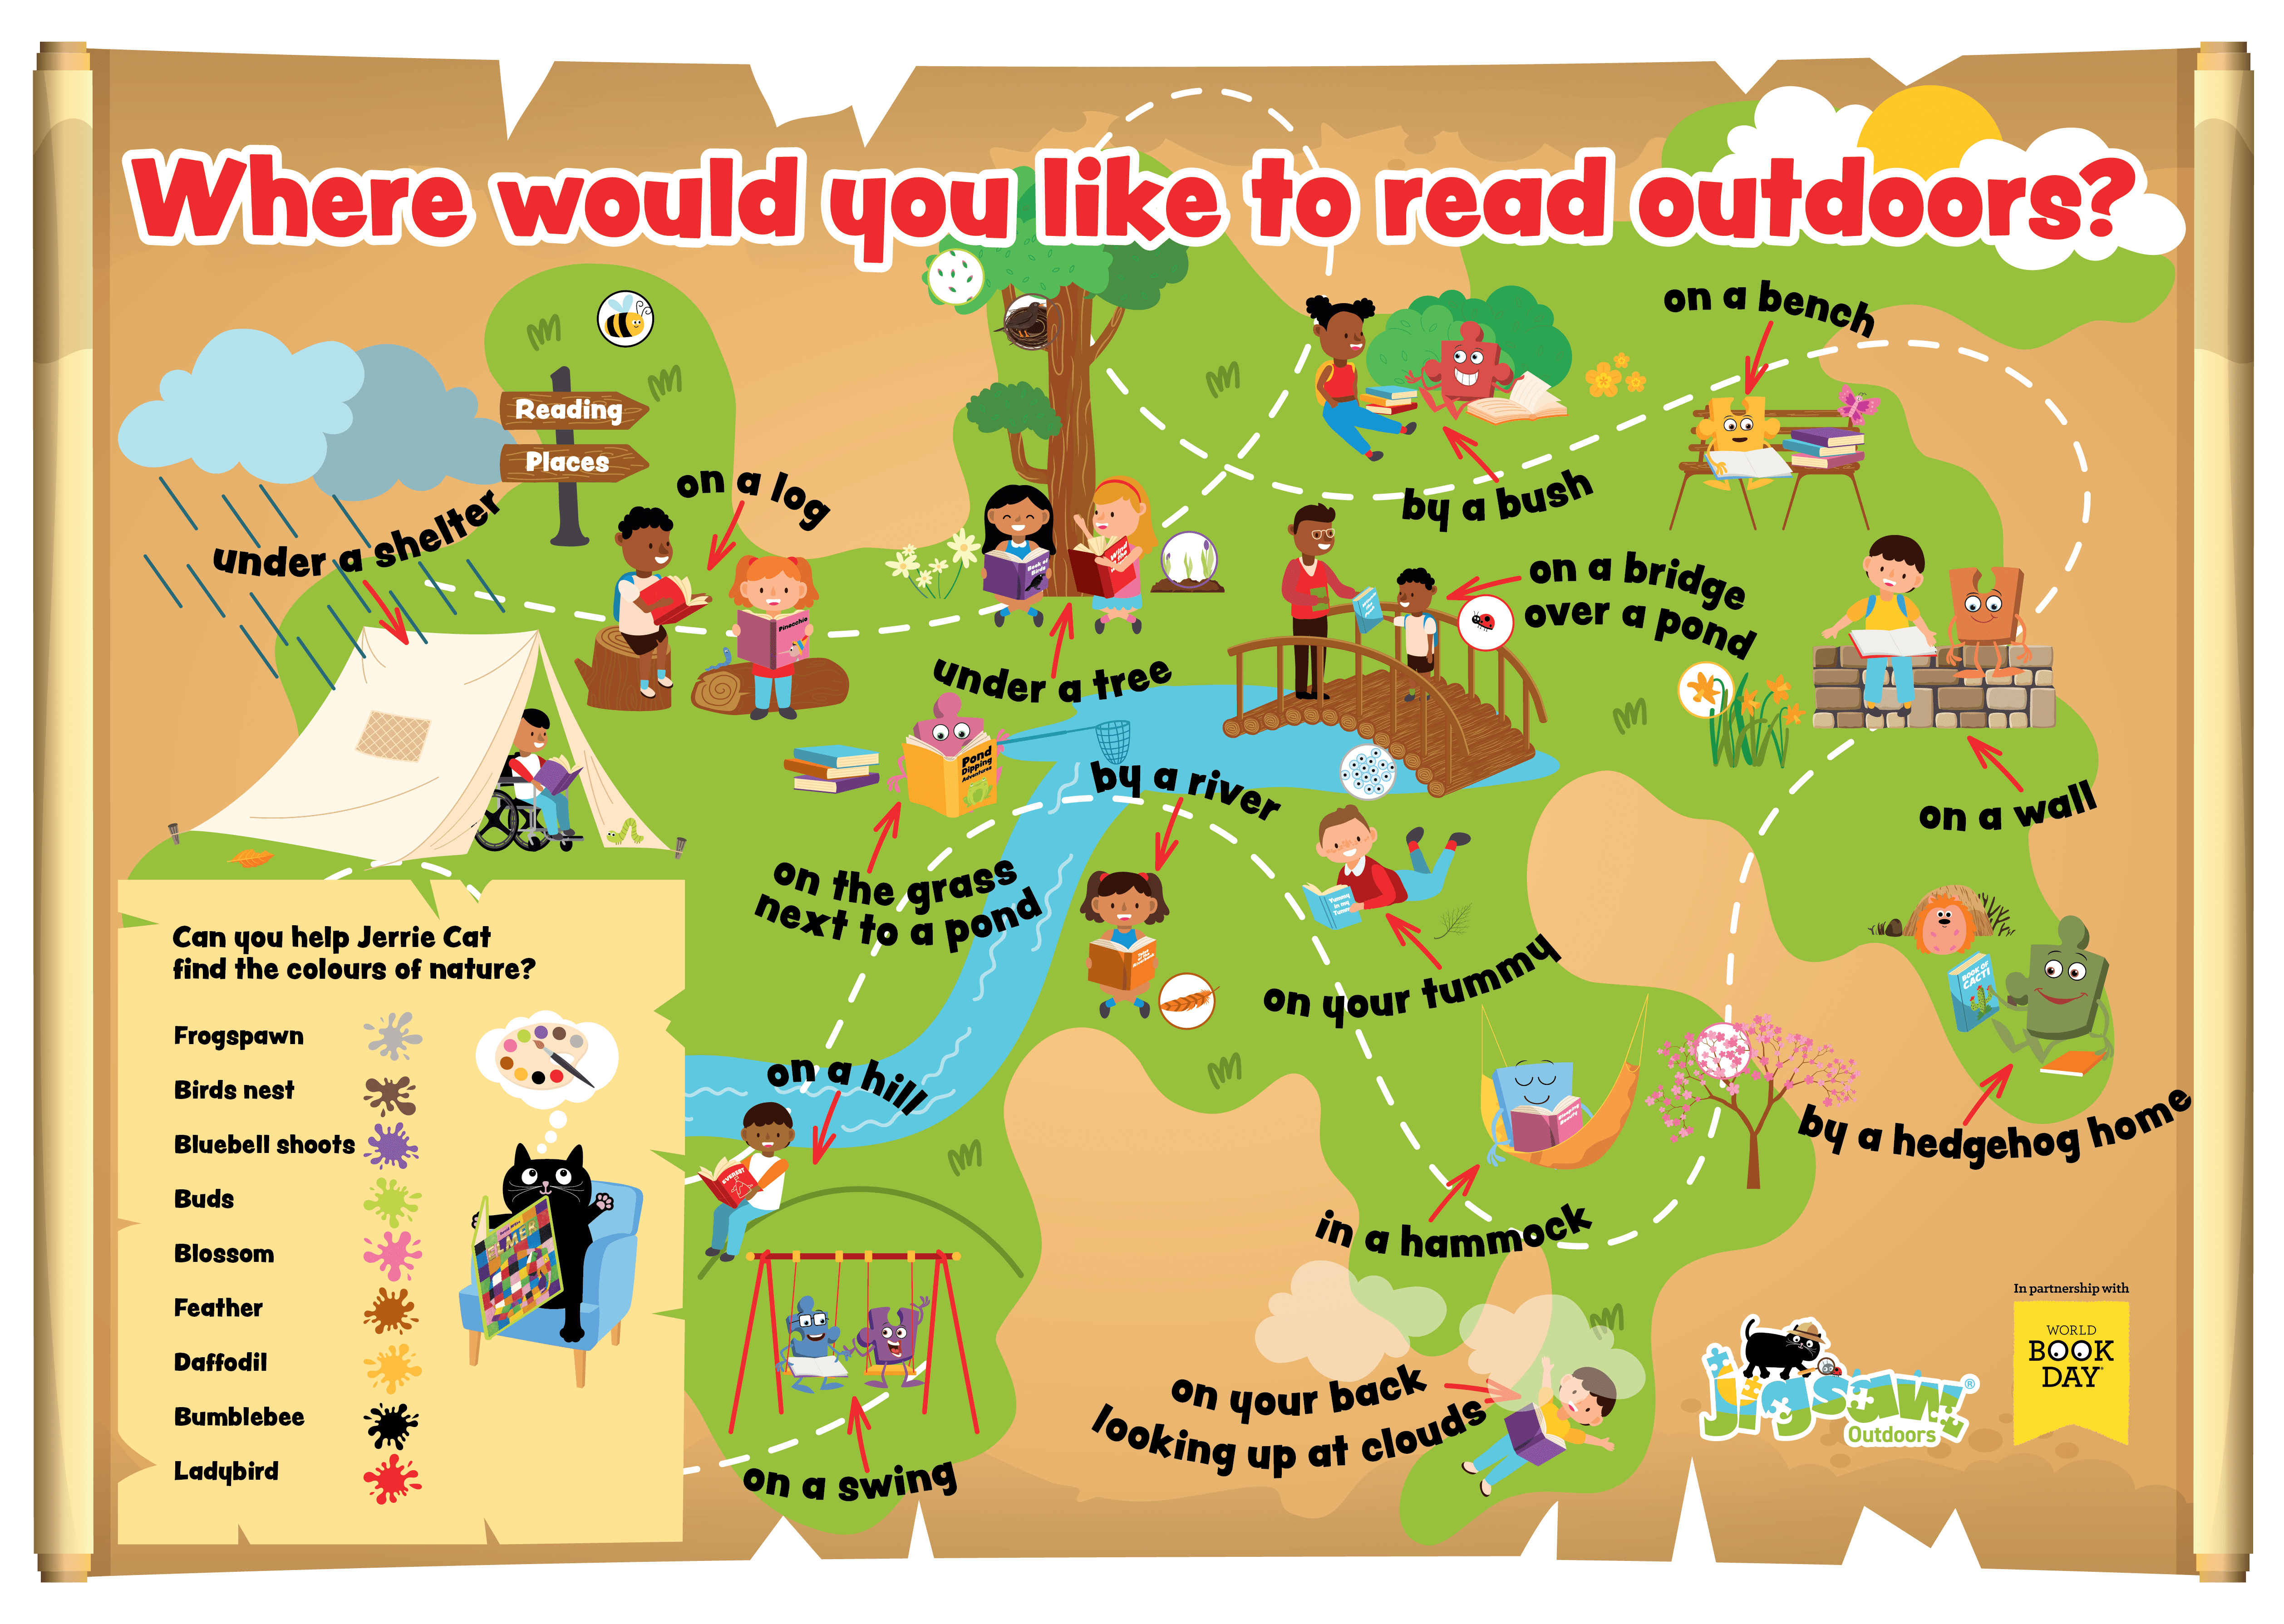 Reading Map